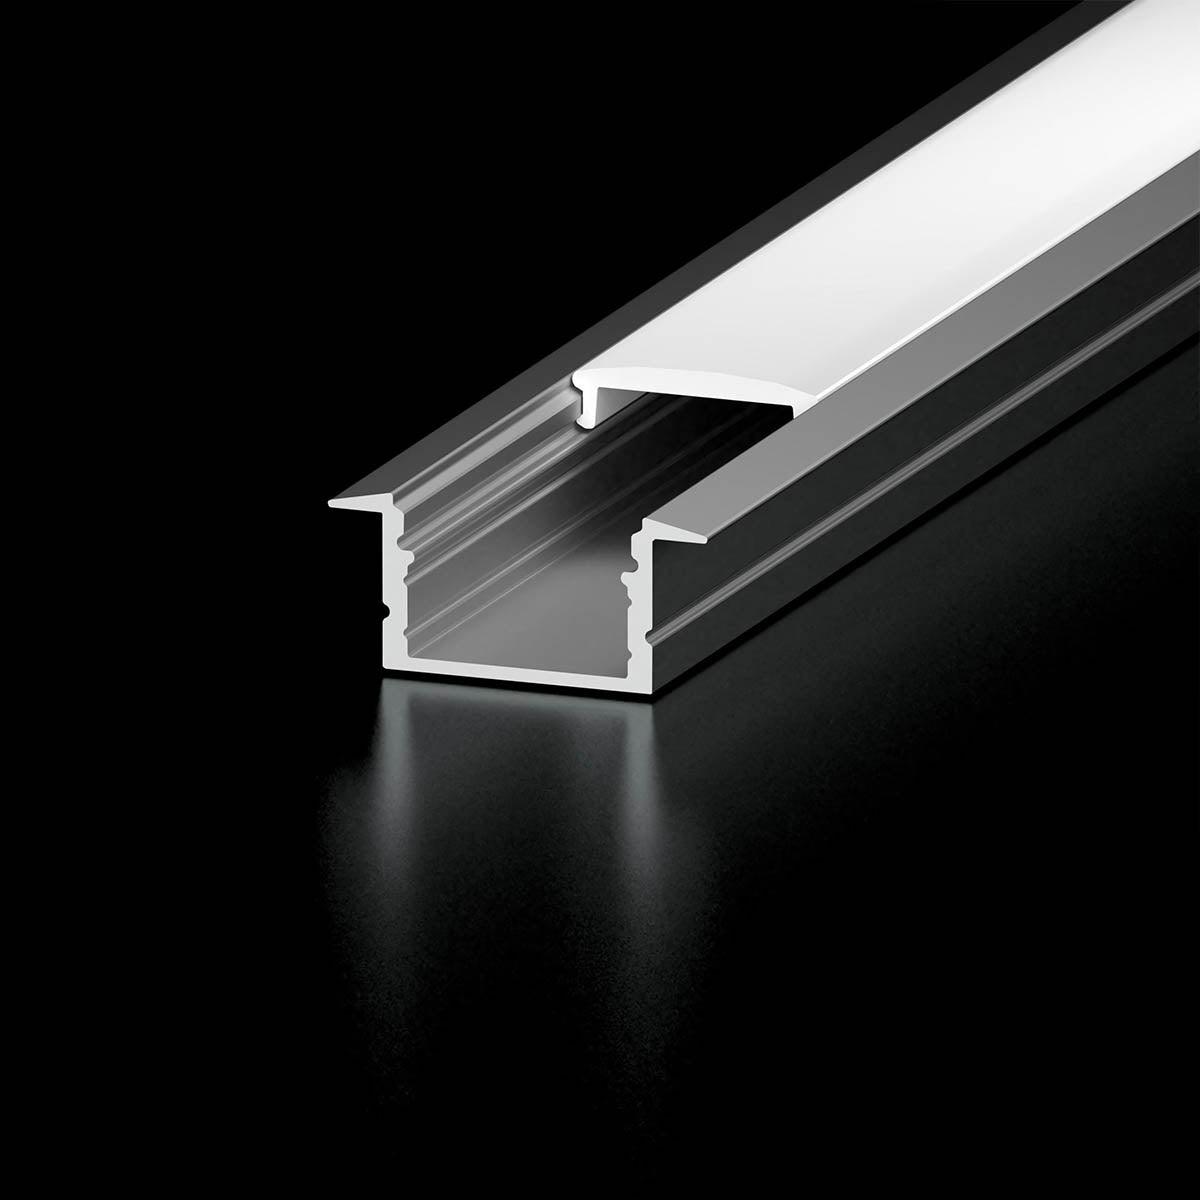 48in. Chromapath Bundle, Recessed Aluminum Channel for Tape lights Up To 12mm, Frosted cover - Bees Lighting